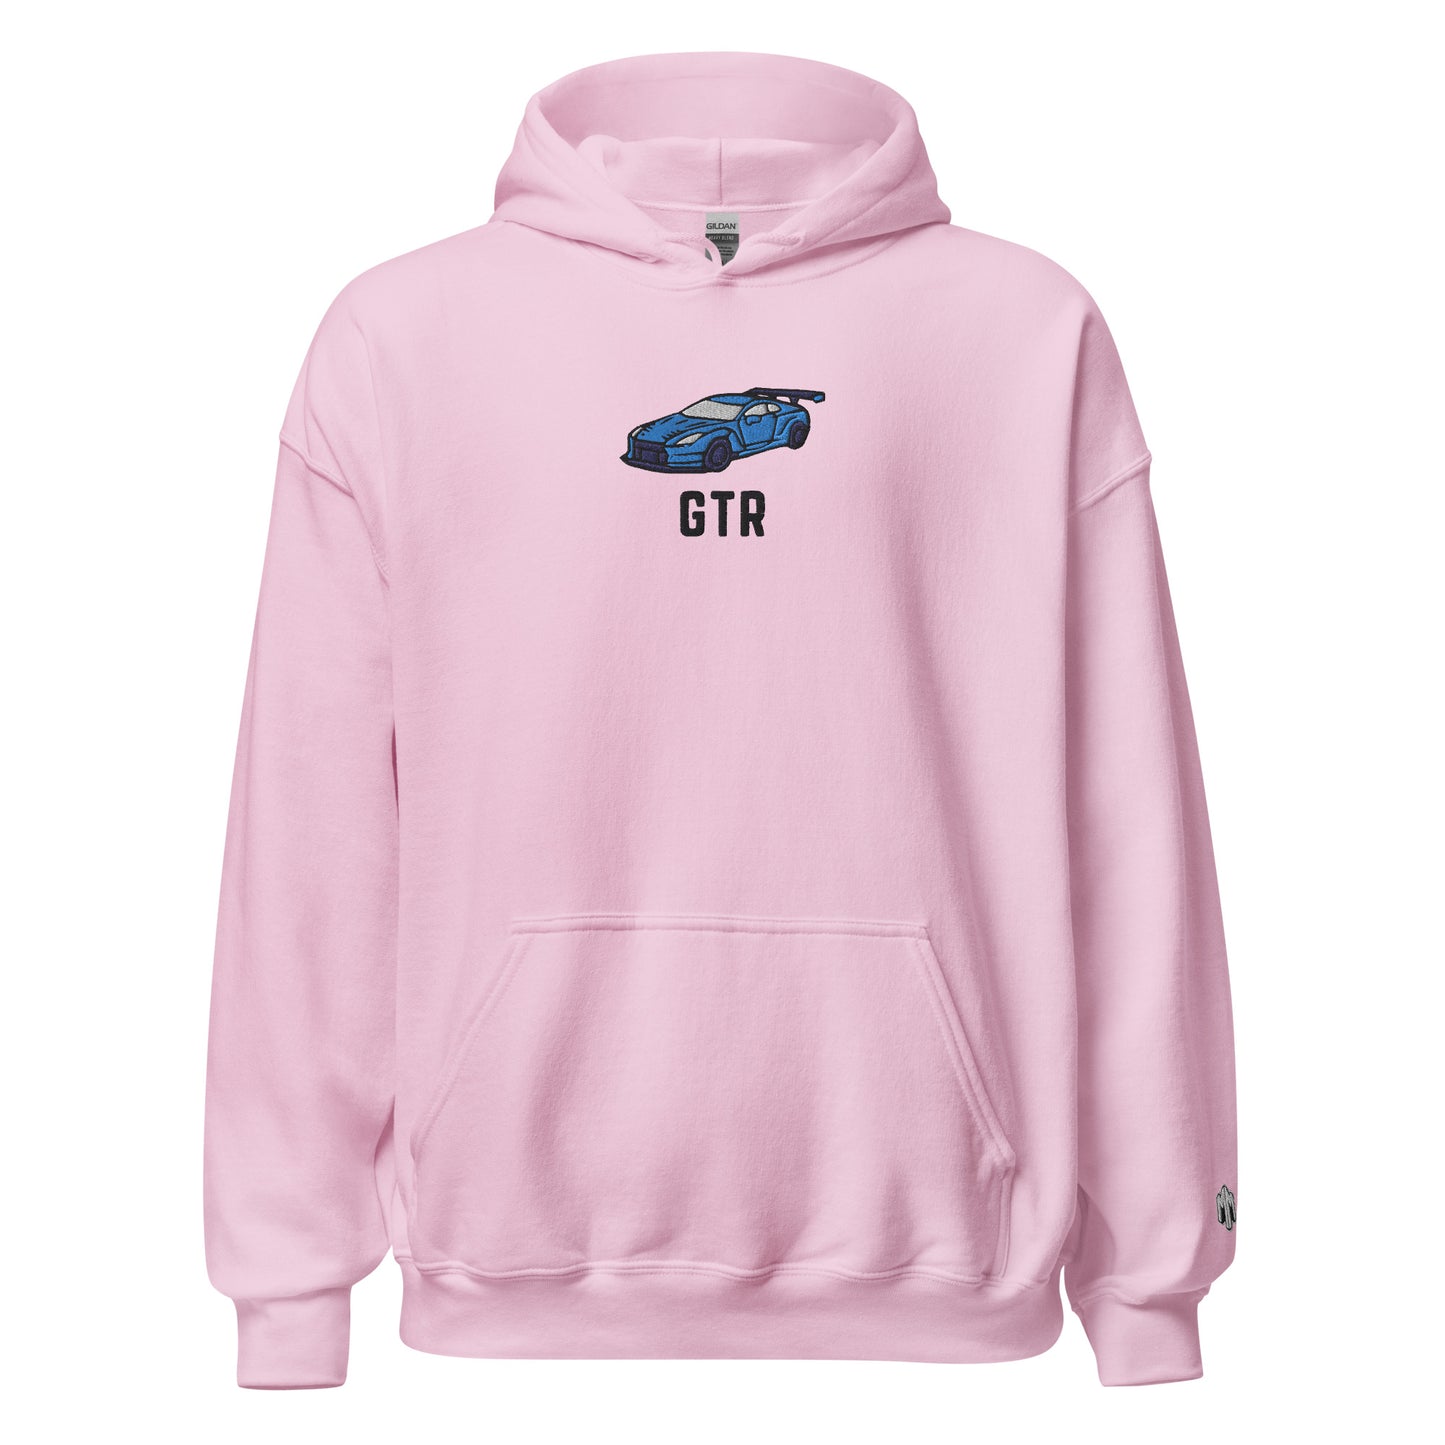 Blue GTR | Hoodie (Embroidered)